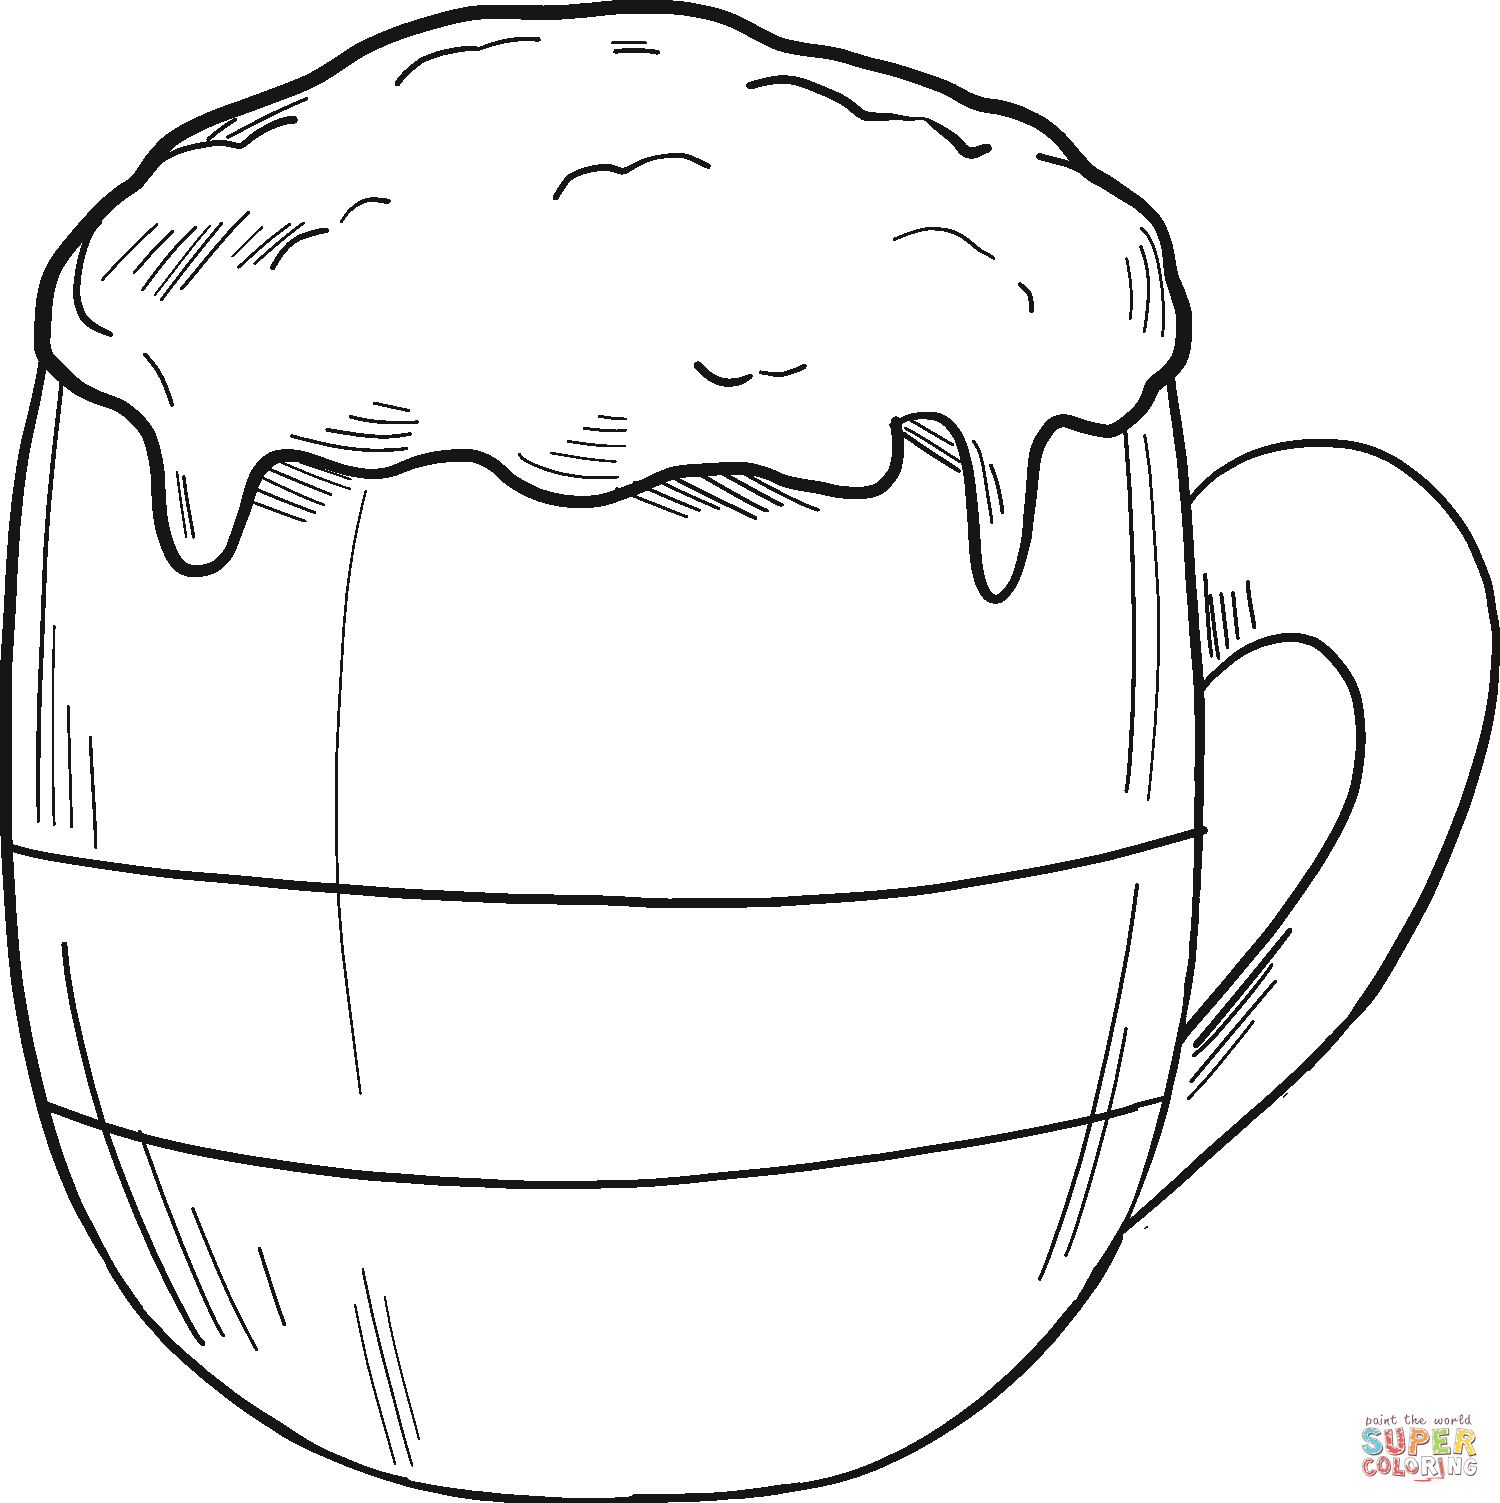 Hot chocolate coloring page free printable coloring pages